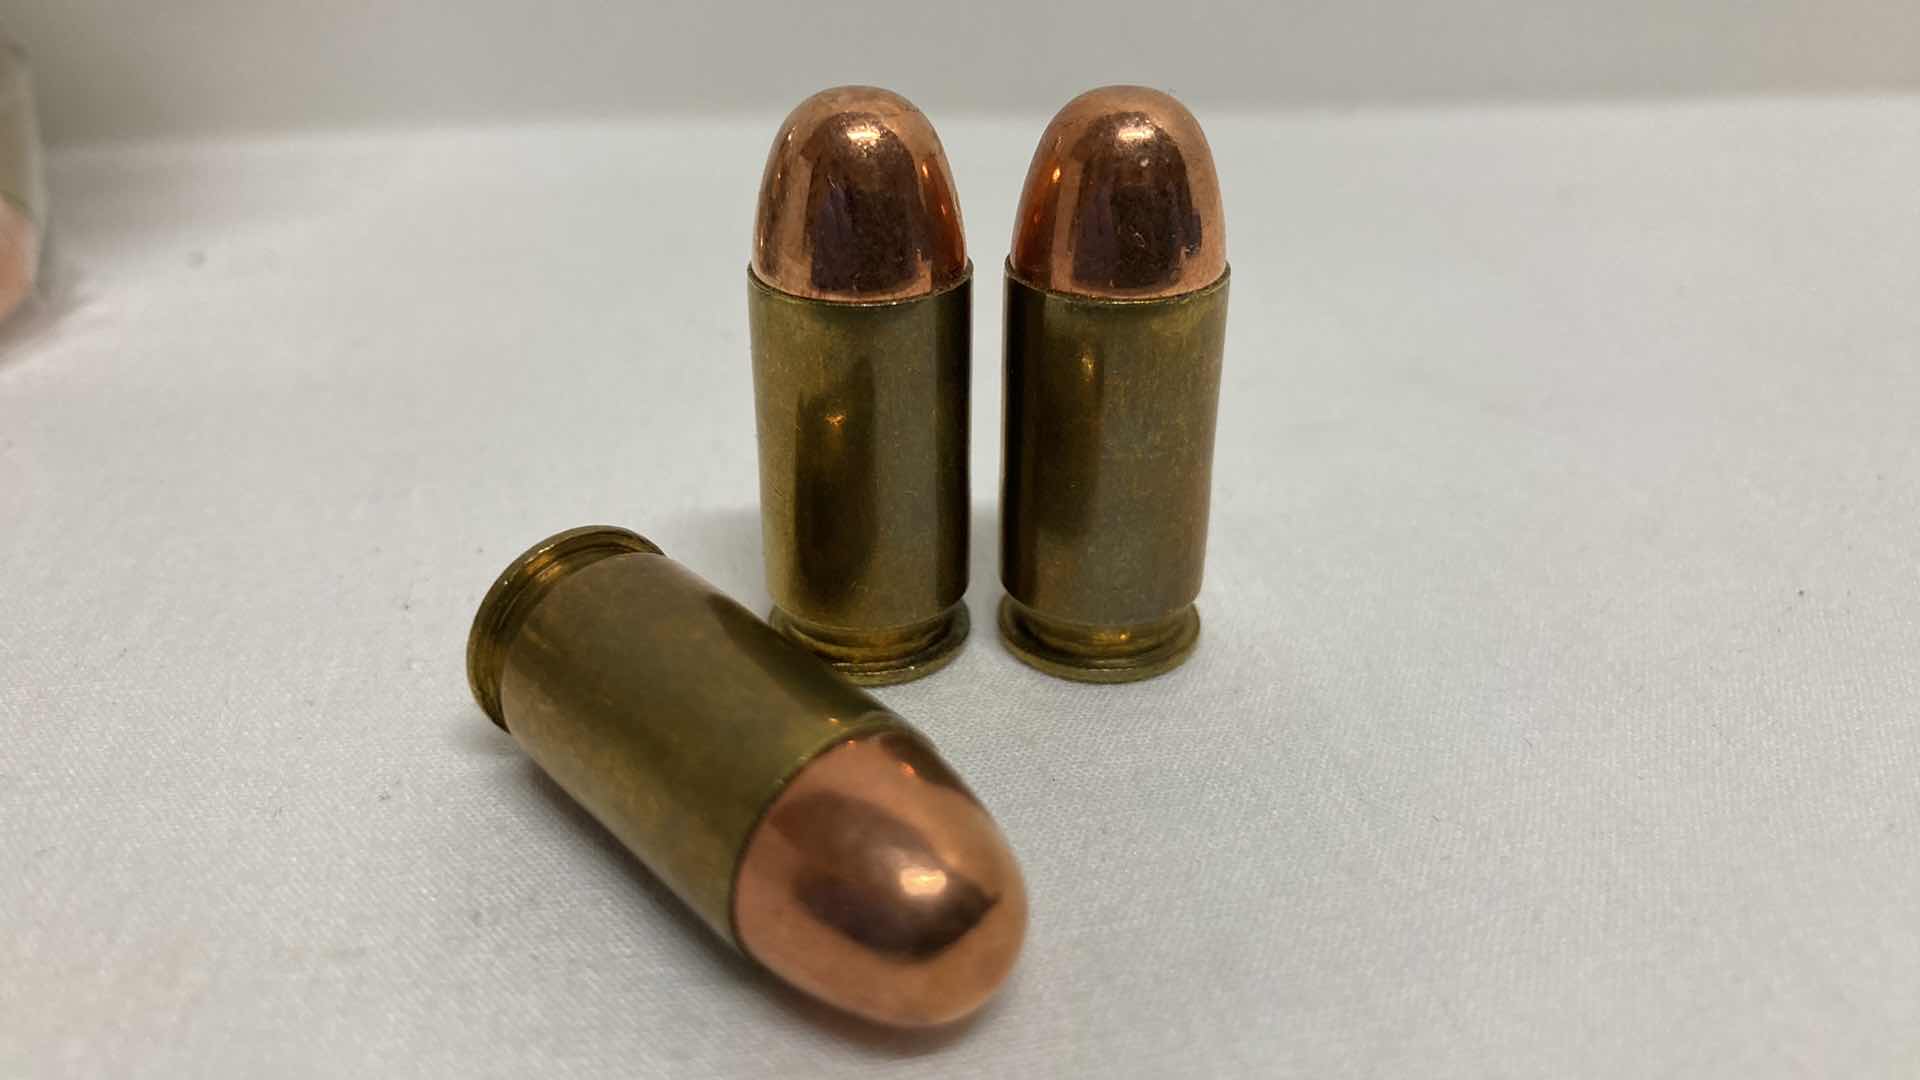 Photo 2 of WASHOUGAL RIVER CARTRIDGE COMPANY 45 ACP 230GR TMJ BRASS CASE AMMO RELOADS (131RDS)